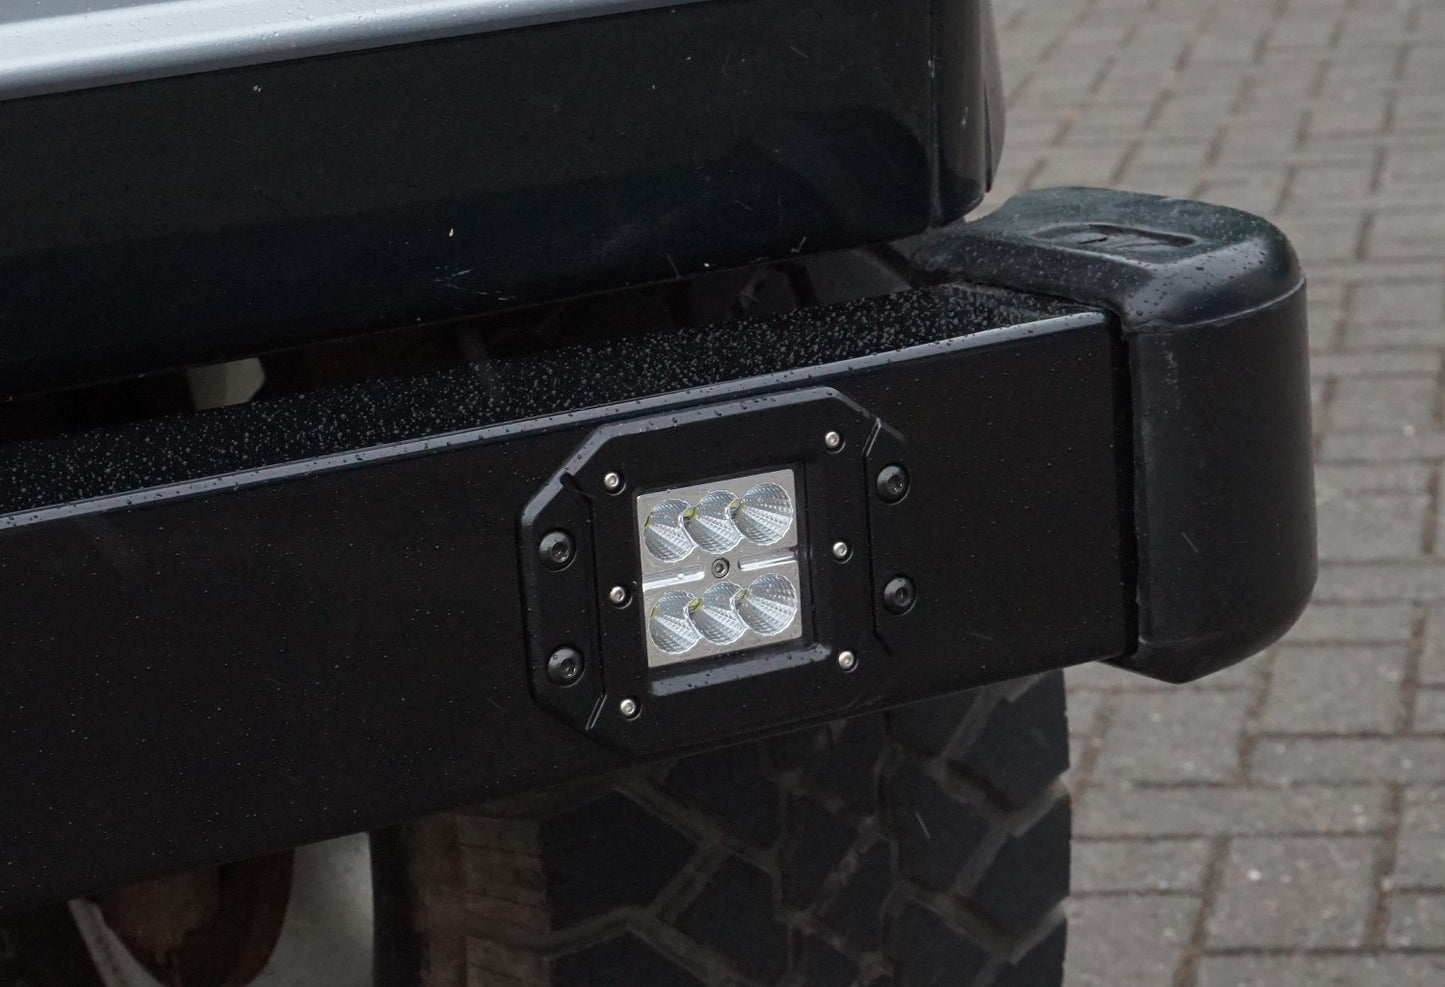 Front Bumper - Black with Long DRL's - for Land Rover Defender